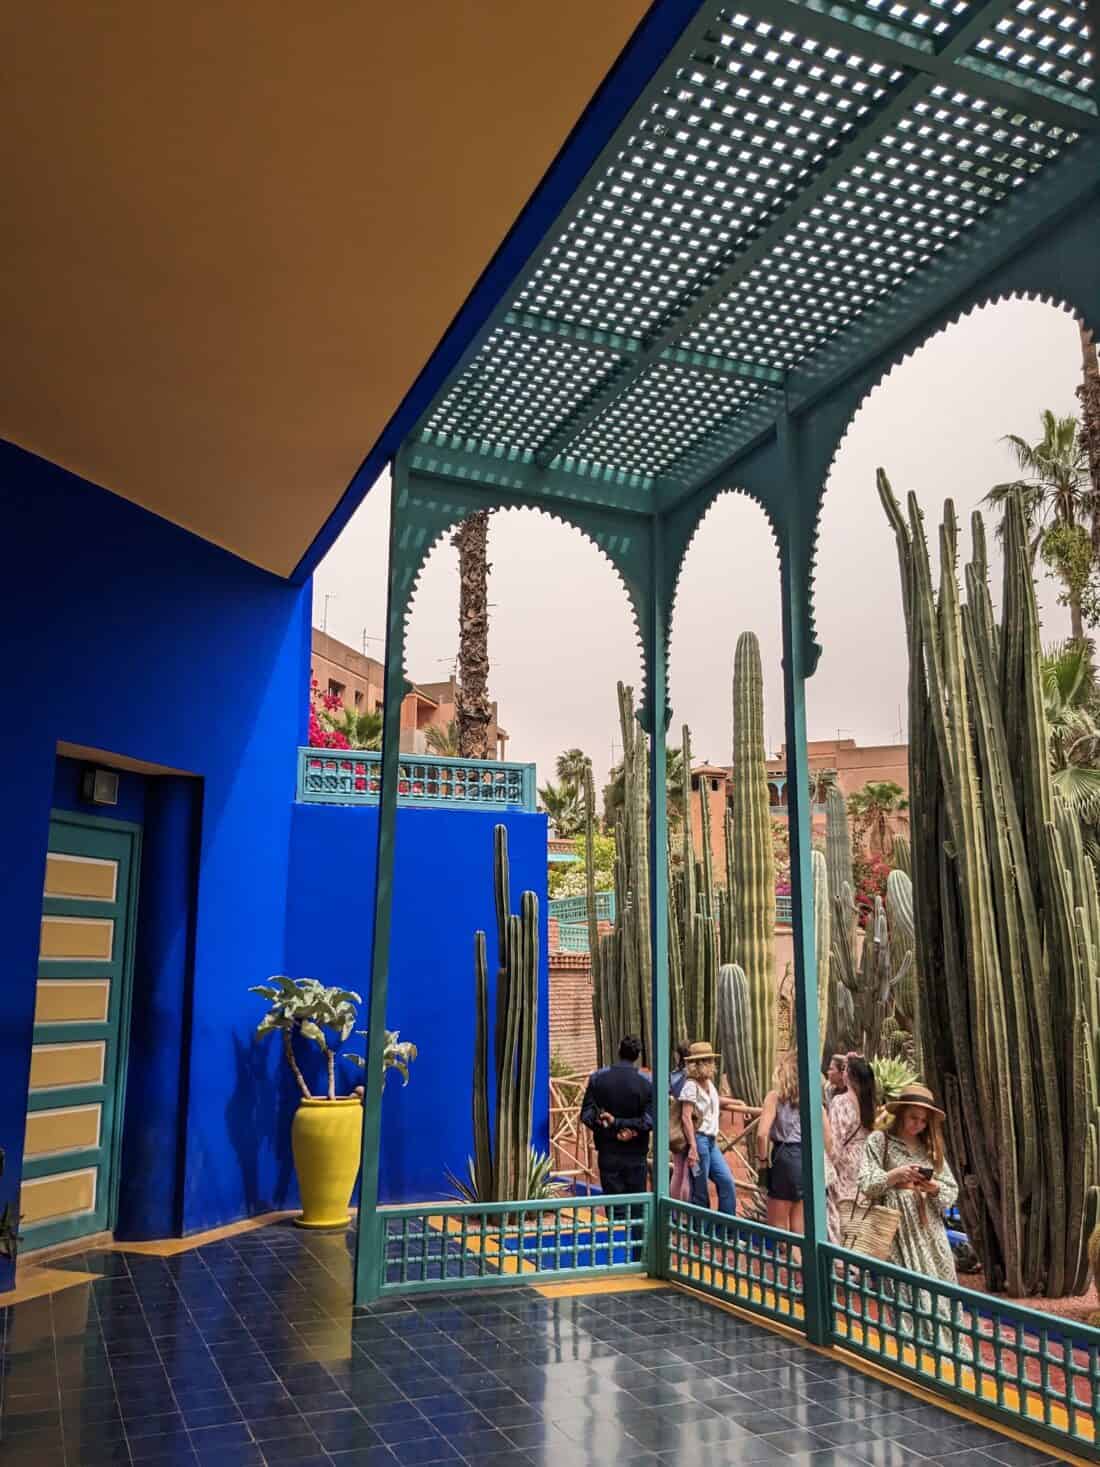 A vibrant blue courtyard with traditional moroccan architecture, featuring tall cacti and visitors exploring the space.